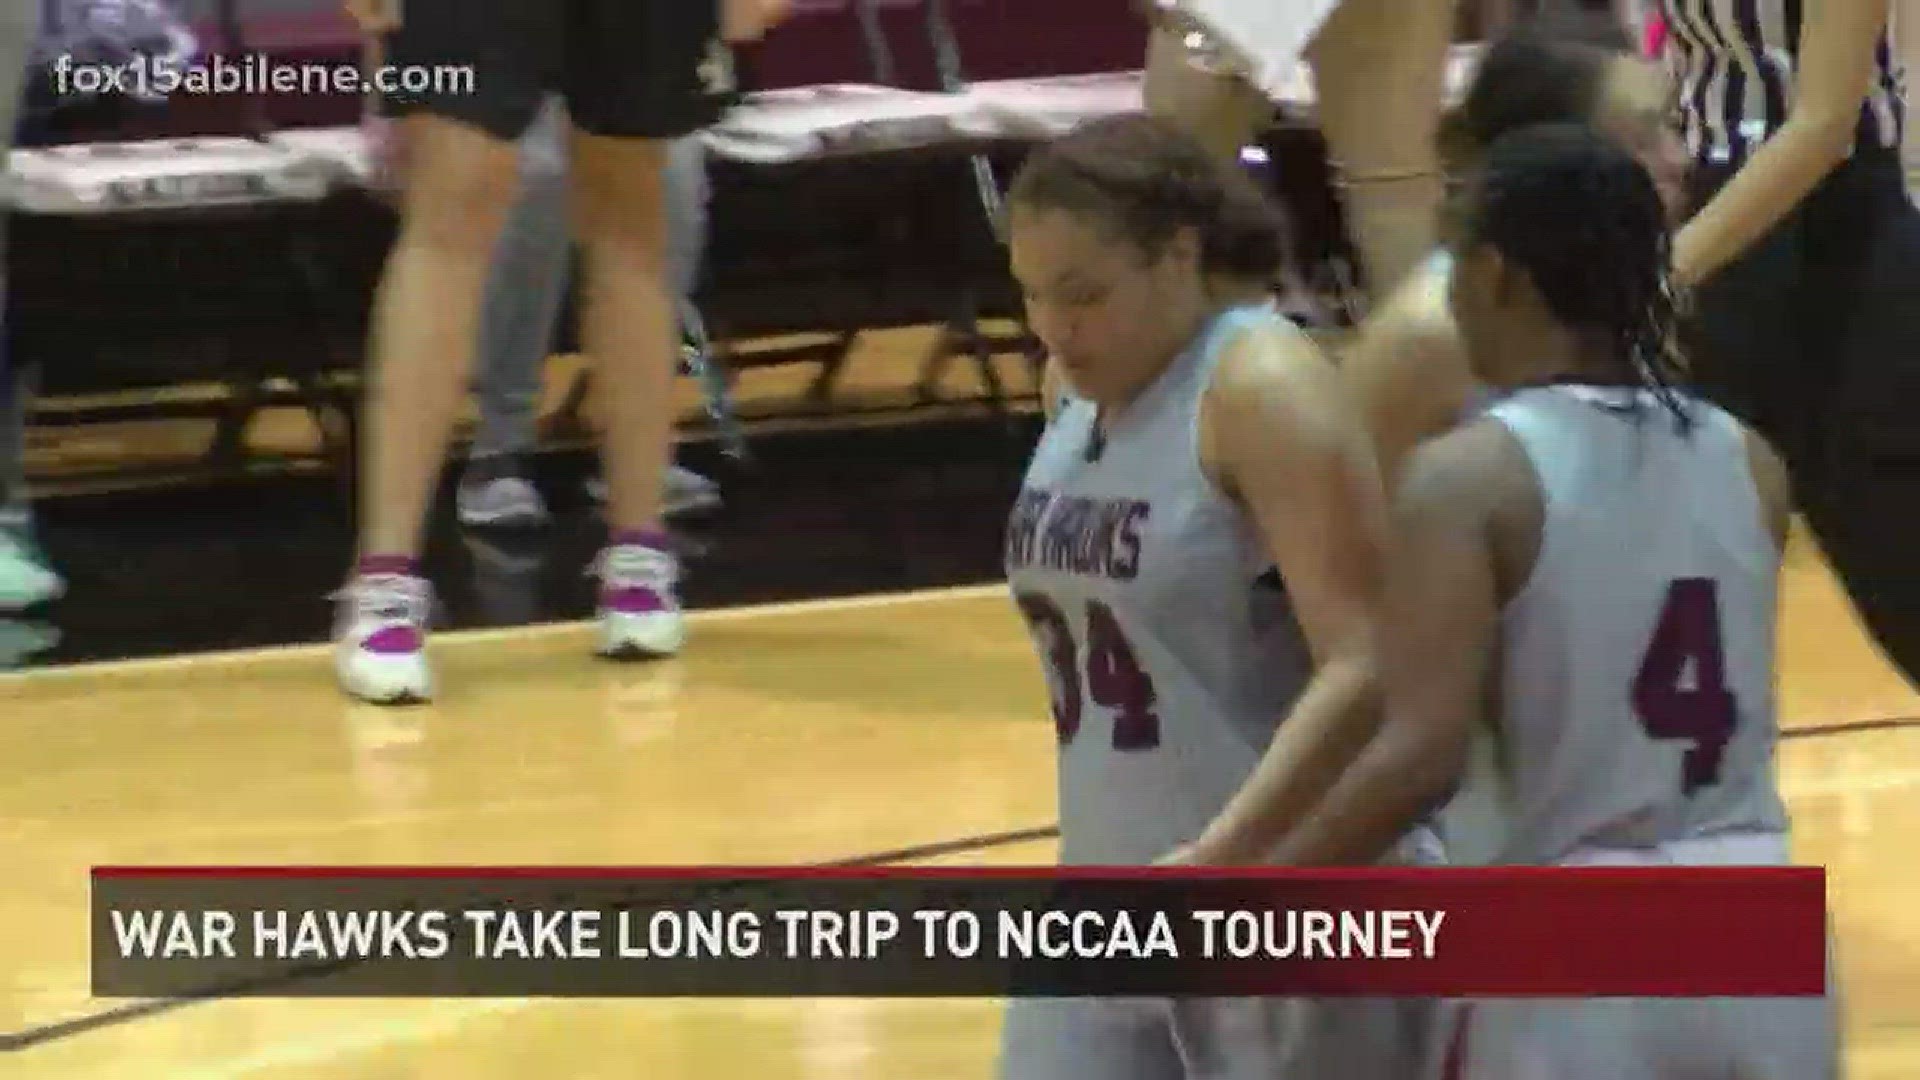 McMurry will be travelling up to Kansas for the NCCAA Central Region Tournament. Considering that this is a far trip and the team hasn't played in quite some time, McMurry will have to find ways to bring a lot of energy early.